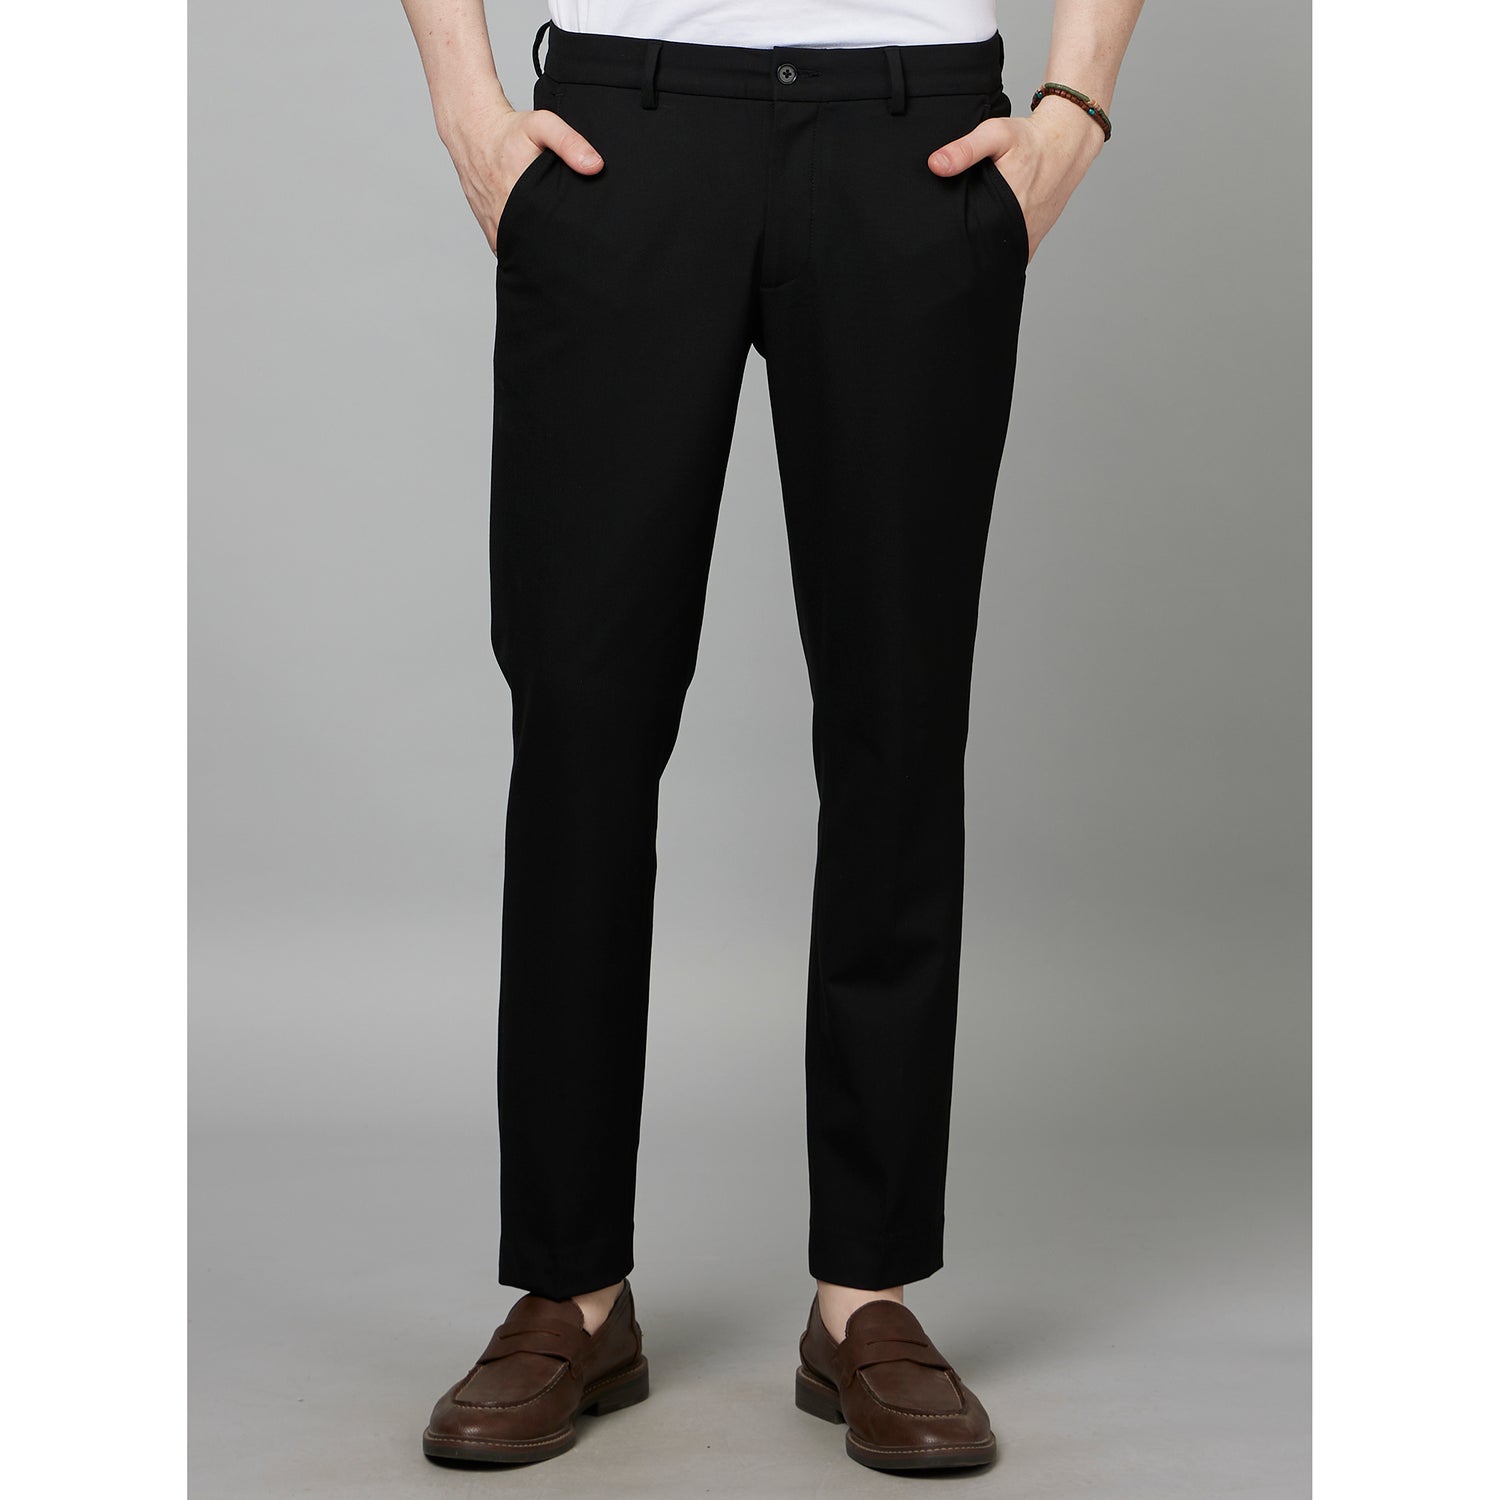 Black Classic Slim Fit Formal Trousers (FOFORM)